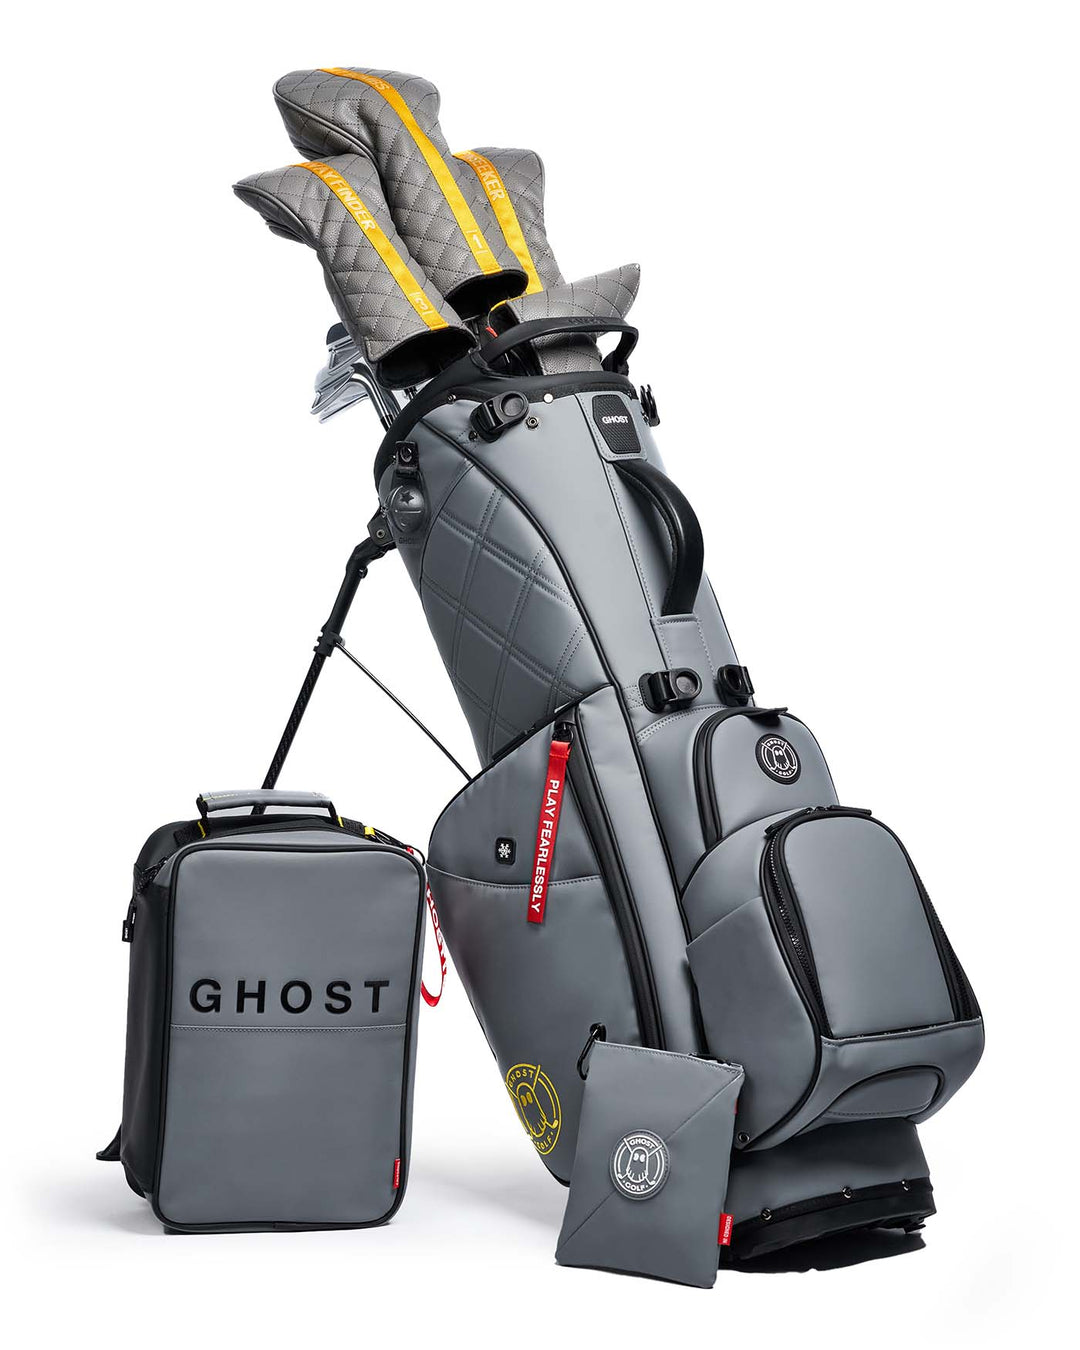 Ghost Golf Maverick Grey Leather Golf Bag with Yellow Logo Stitch and Red Tags and Golf Clubs with Grey Head Covers and Grey SHow Bag and Pouch